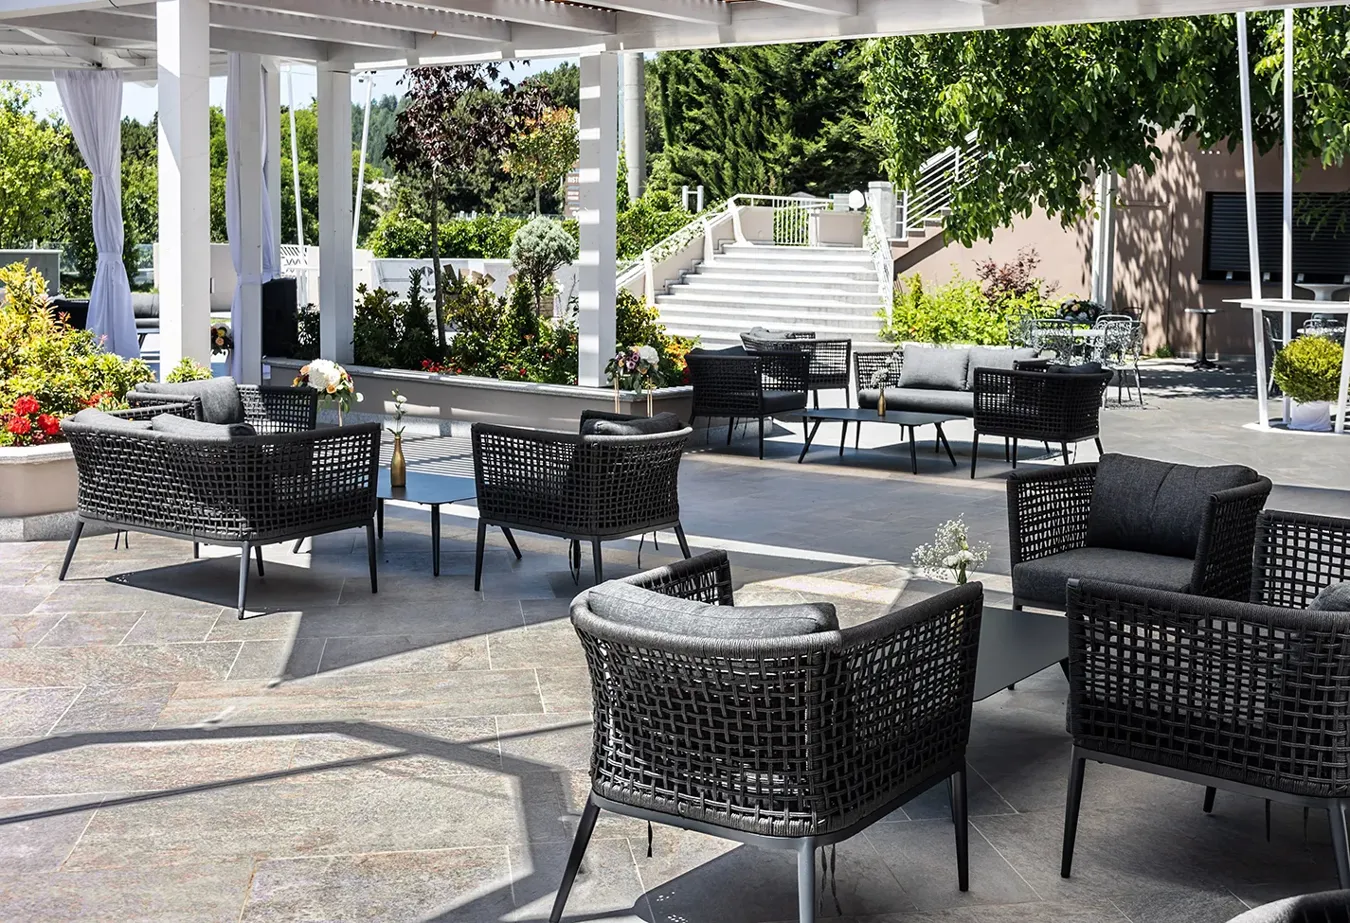 Sophisticated outdoor setting with Percorsi Extra stone effect tiles, black rattan furniture, and lush greenery.